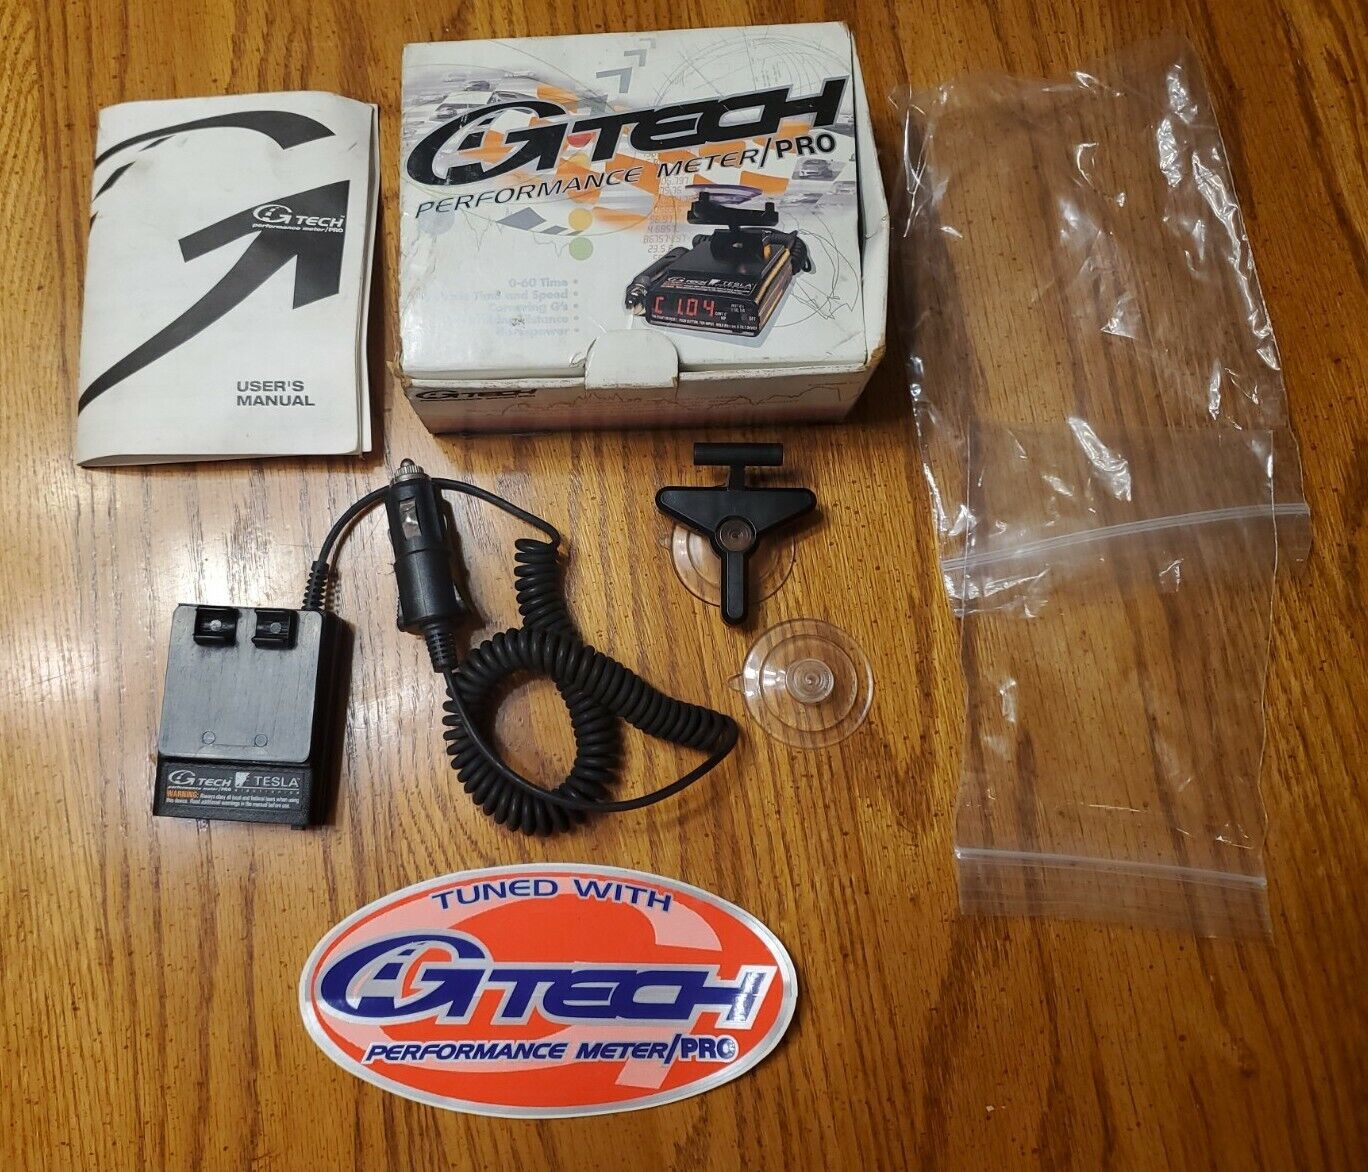 GTech Pro Performance Meter by Tesla Electronics G-Tech Pro Tested